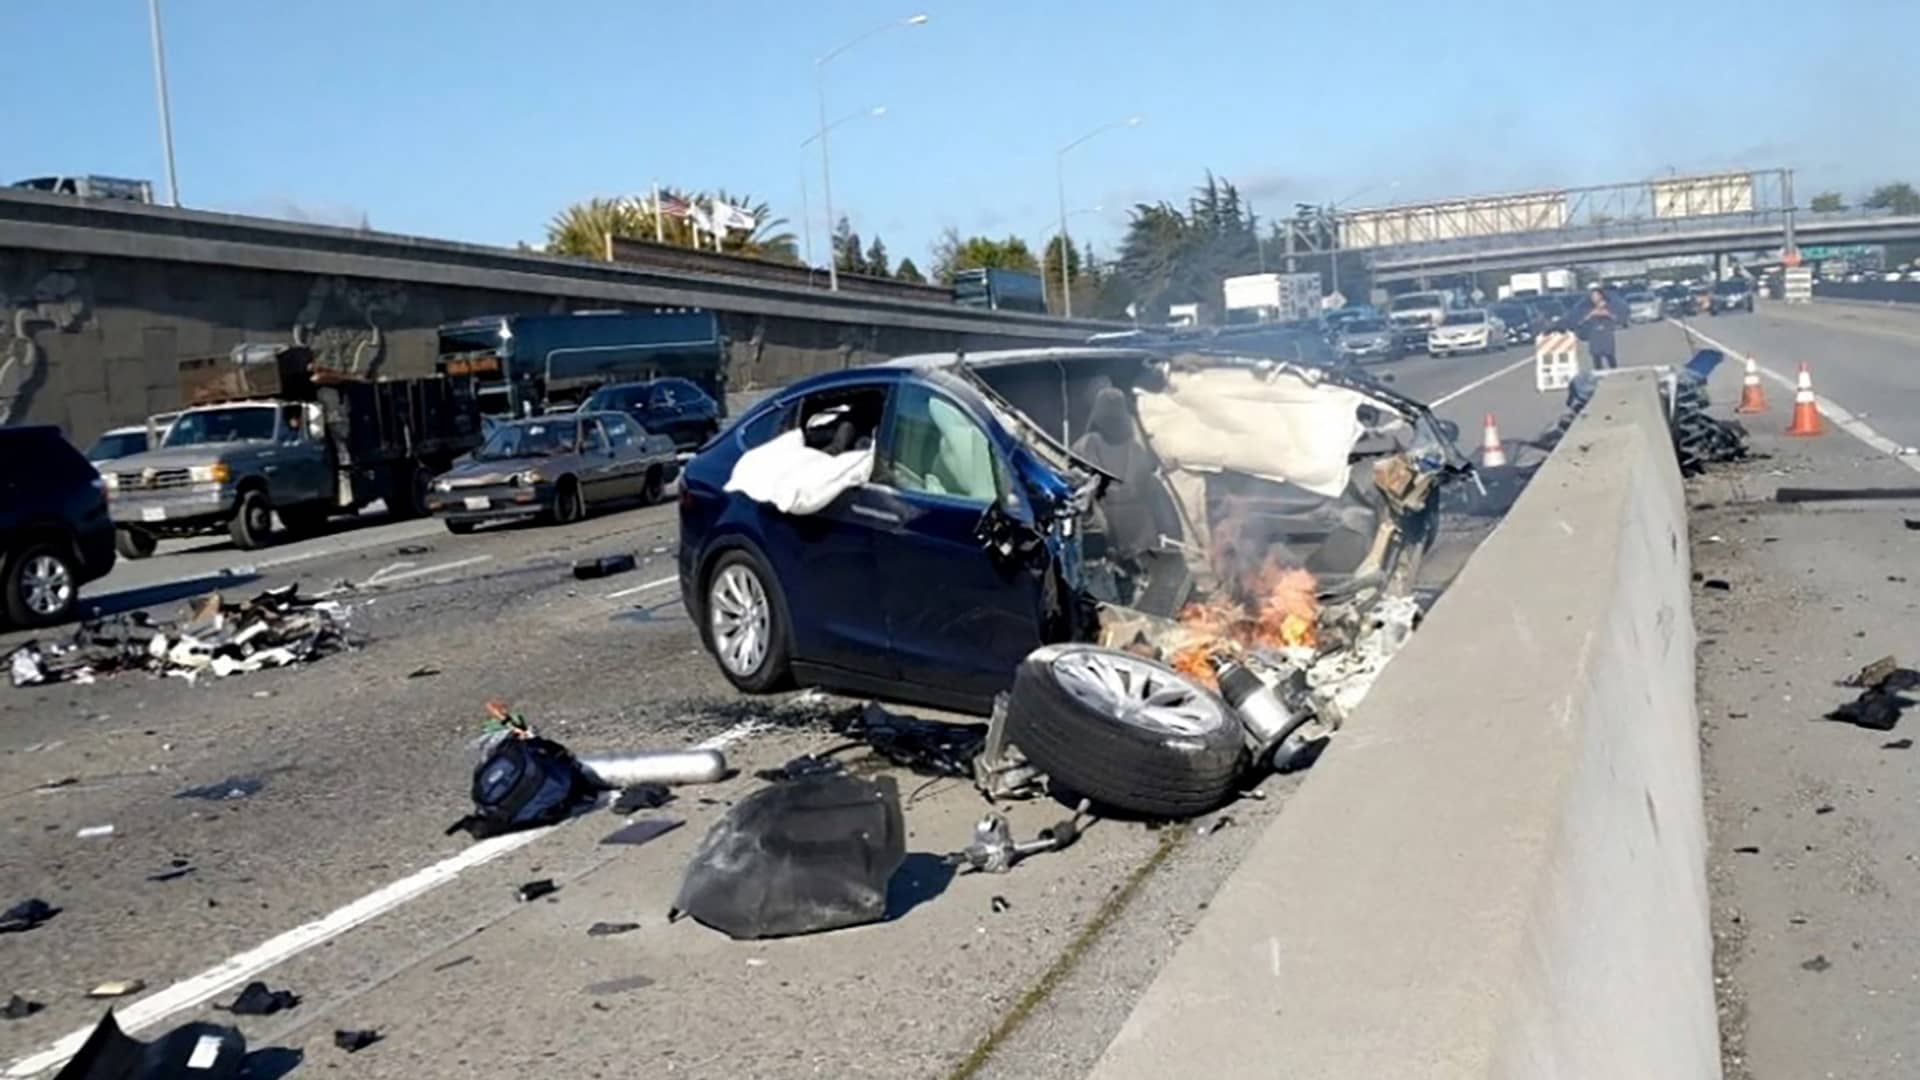 A Tesla Model X which crashed on U.S. Highway 101 (US-101) is seen in Mountain View, California, U.S. on March 23, 2018 in this handout image. 